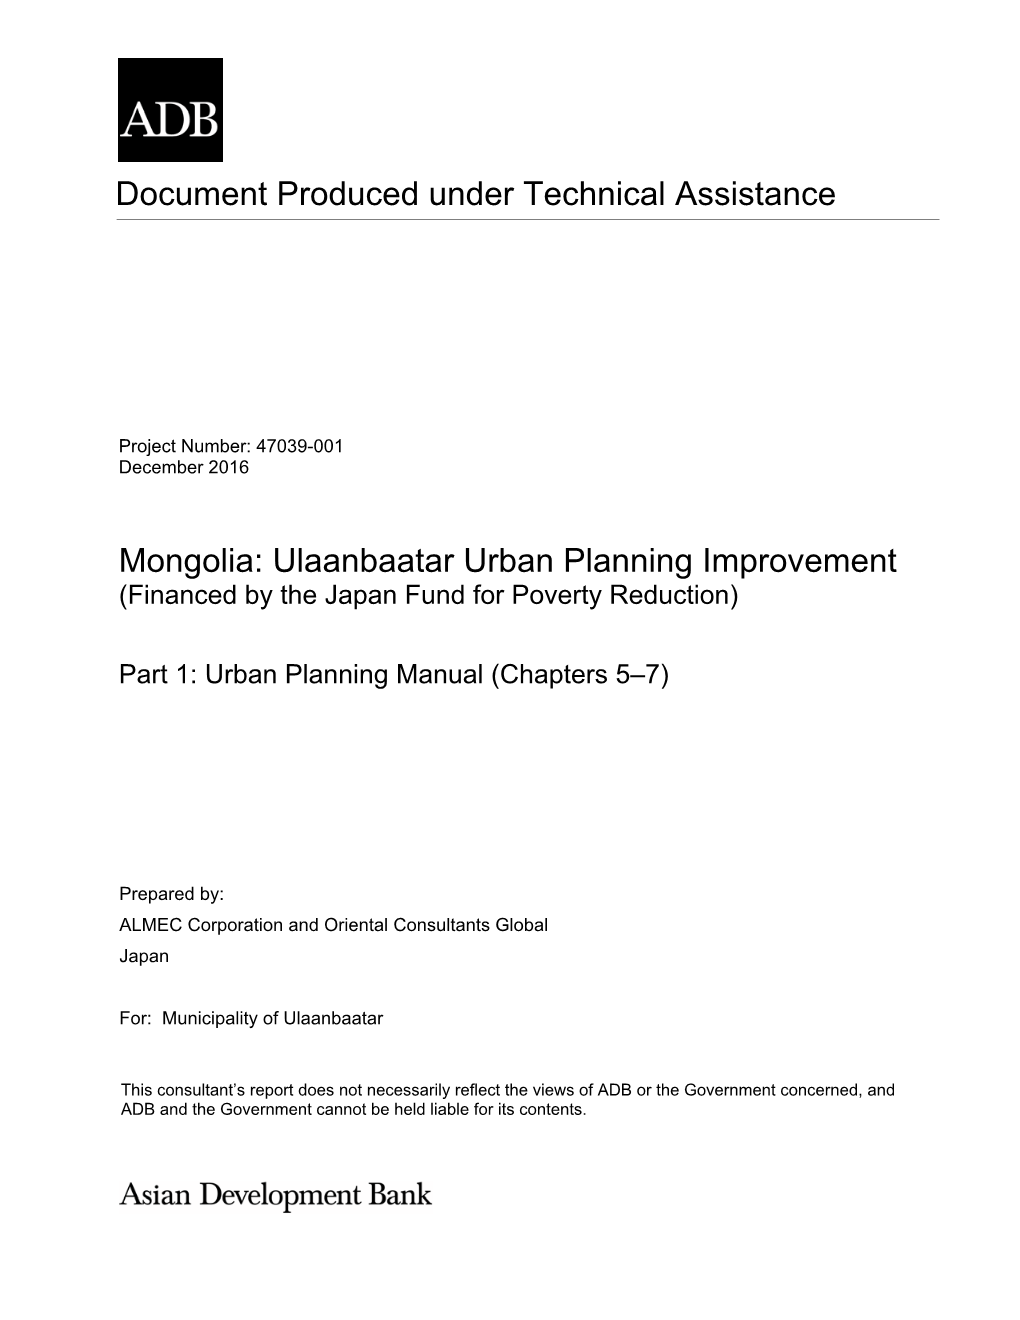 Ulaanbaatar Urban Planning Improvement (Financed by the Japan Fund for Poverty Reduction)